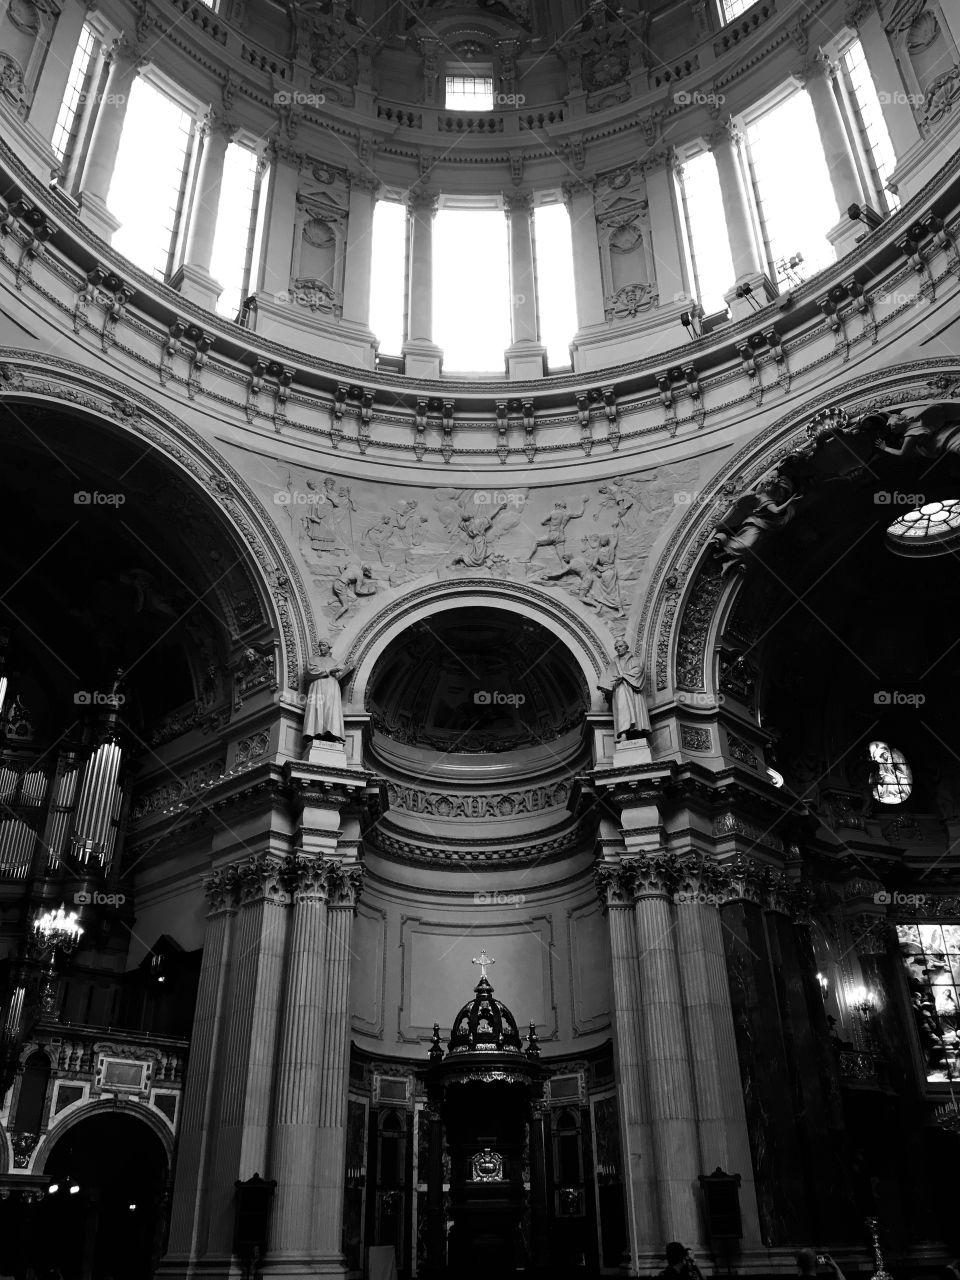 Berliner Dom from the inside